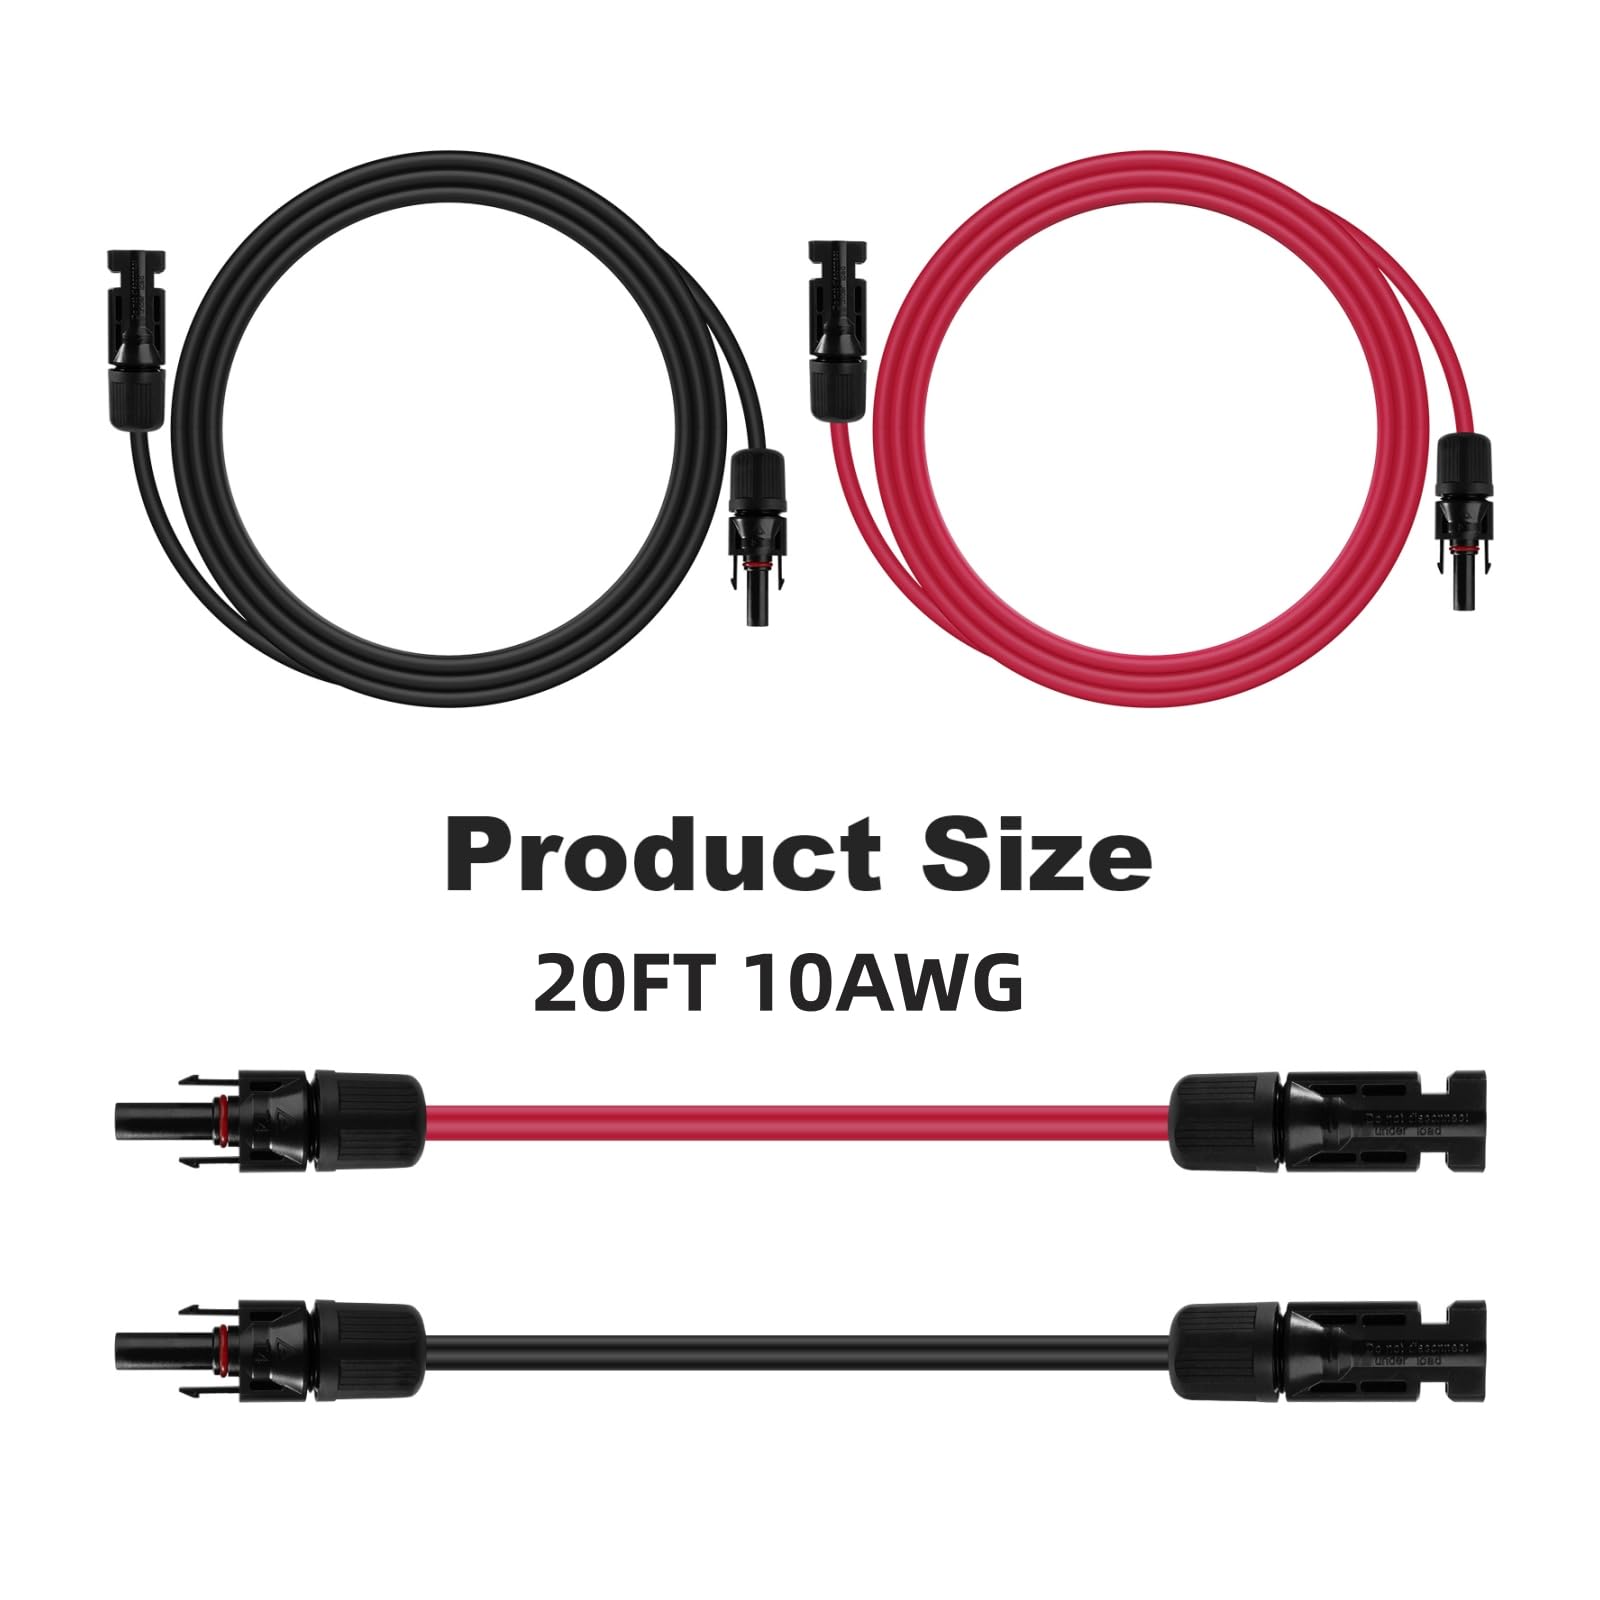 showingo Solar Extension Cord 20 FT 10AWG Solar Panel Extension Cables Solar Adaptor Cable with Female and Male Connector(20 FT Red + 20 FT Black)